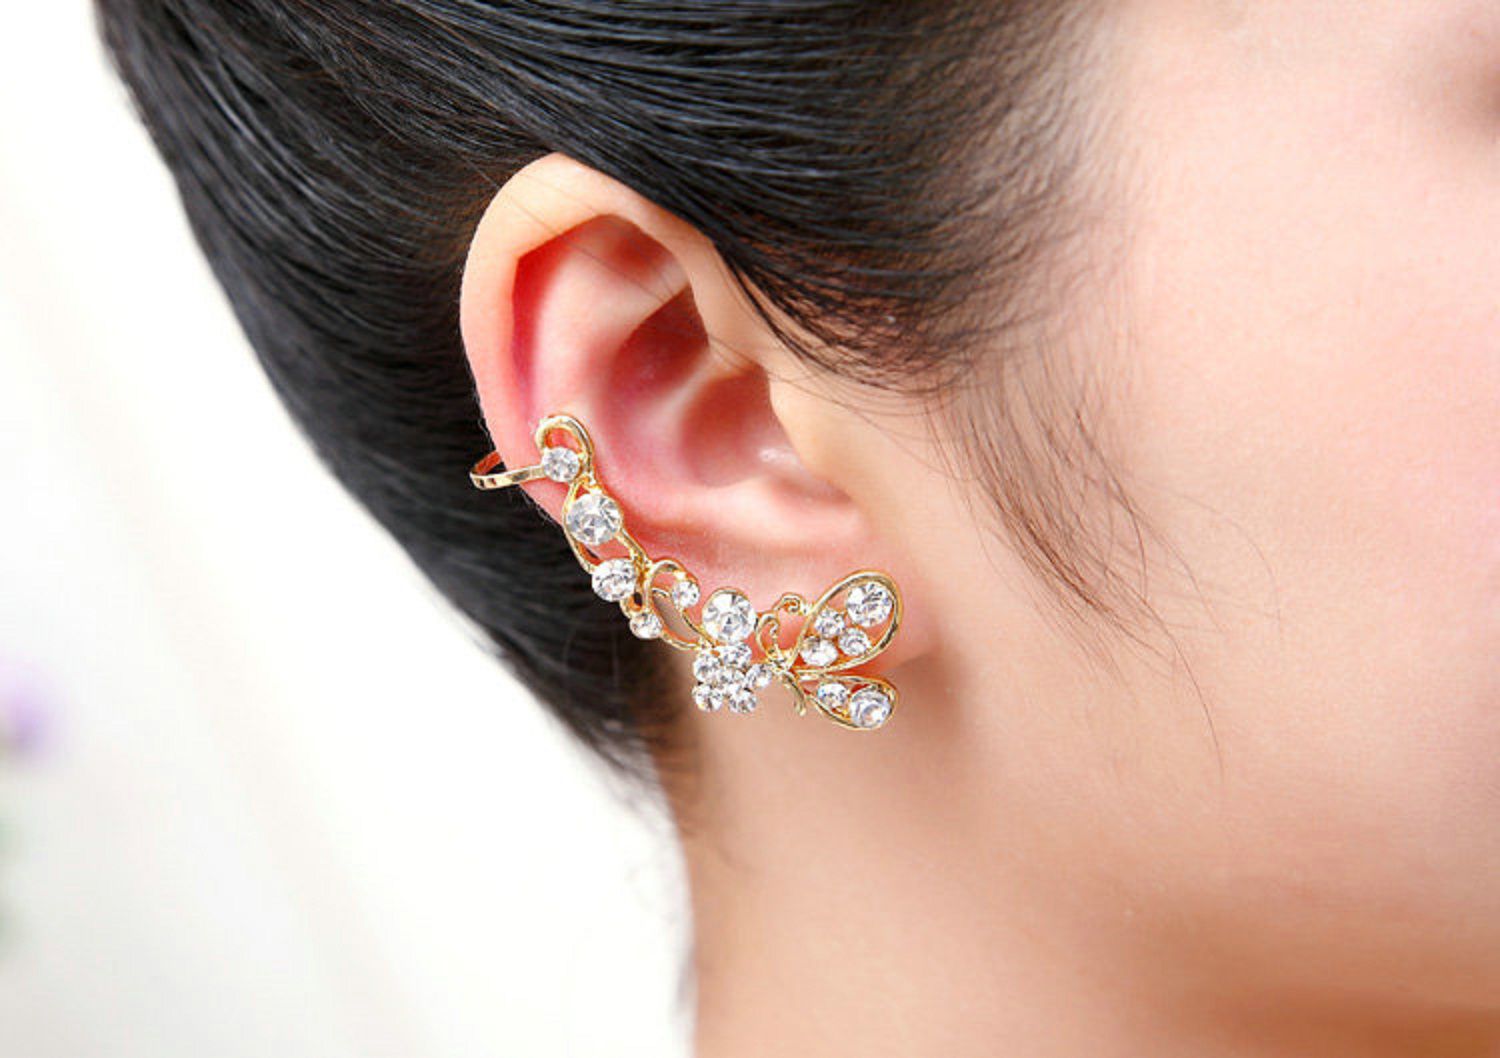 5 Fashionable Ways to Style Ear Cuff Earrings in 2020 - InSerbia News